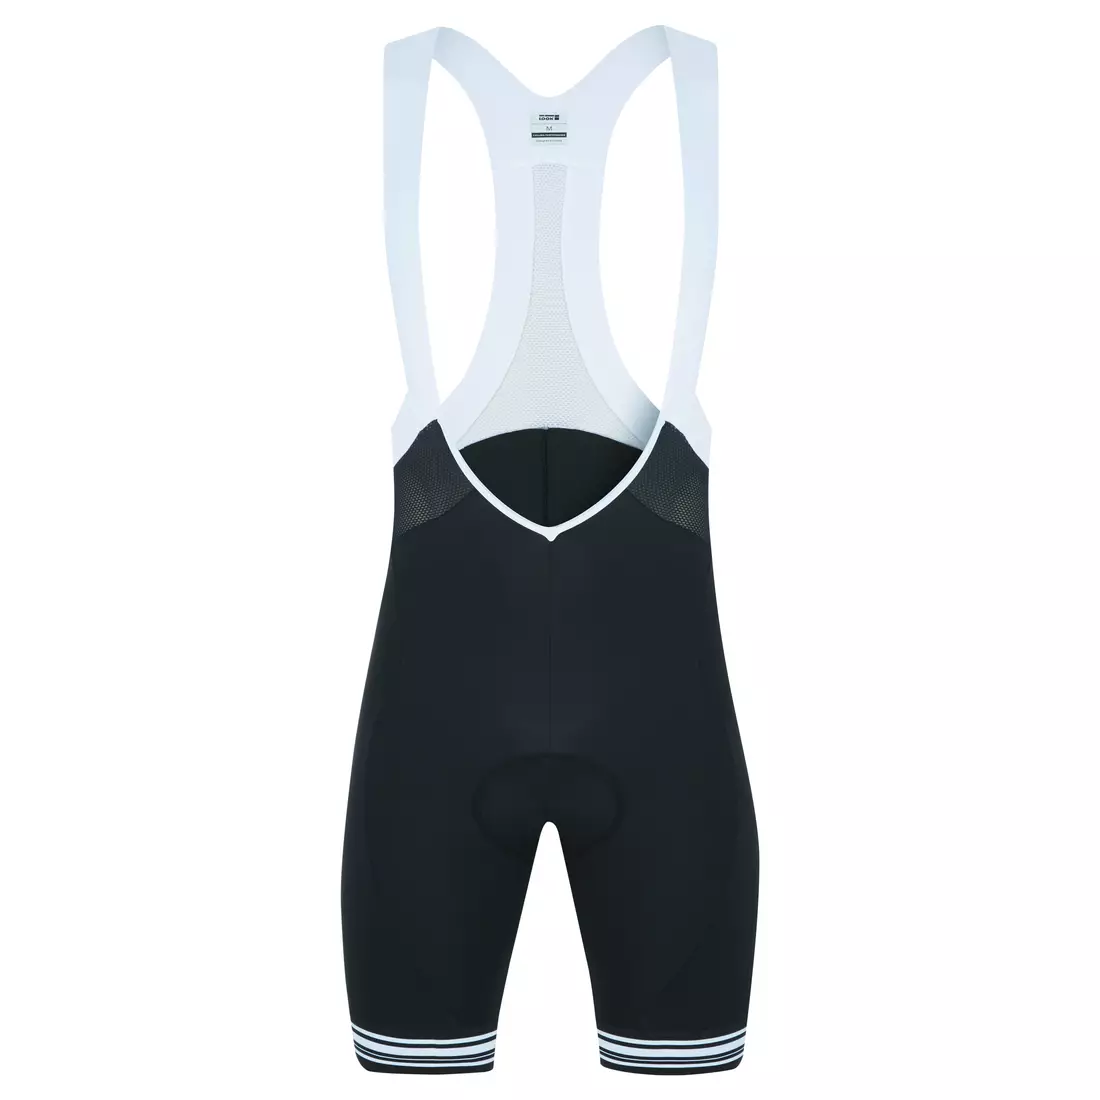 LOOK ULTRA cycling shorts black and white 00015332